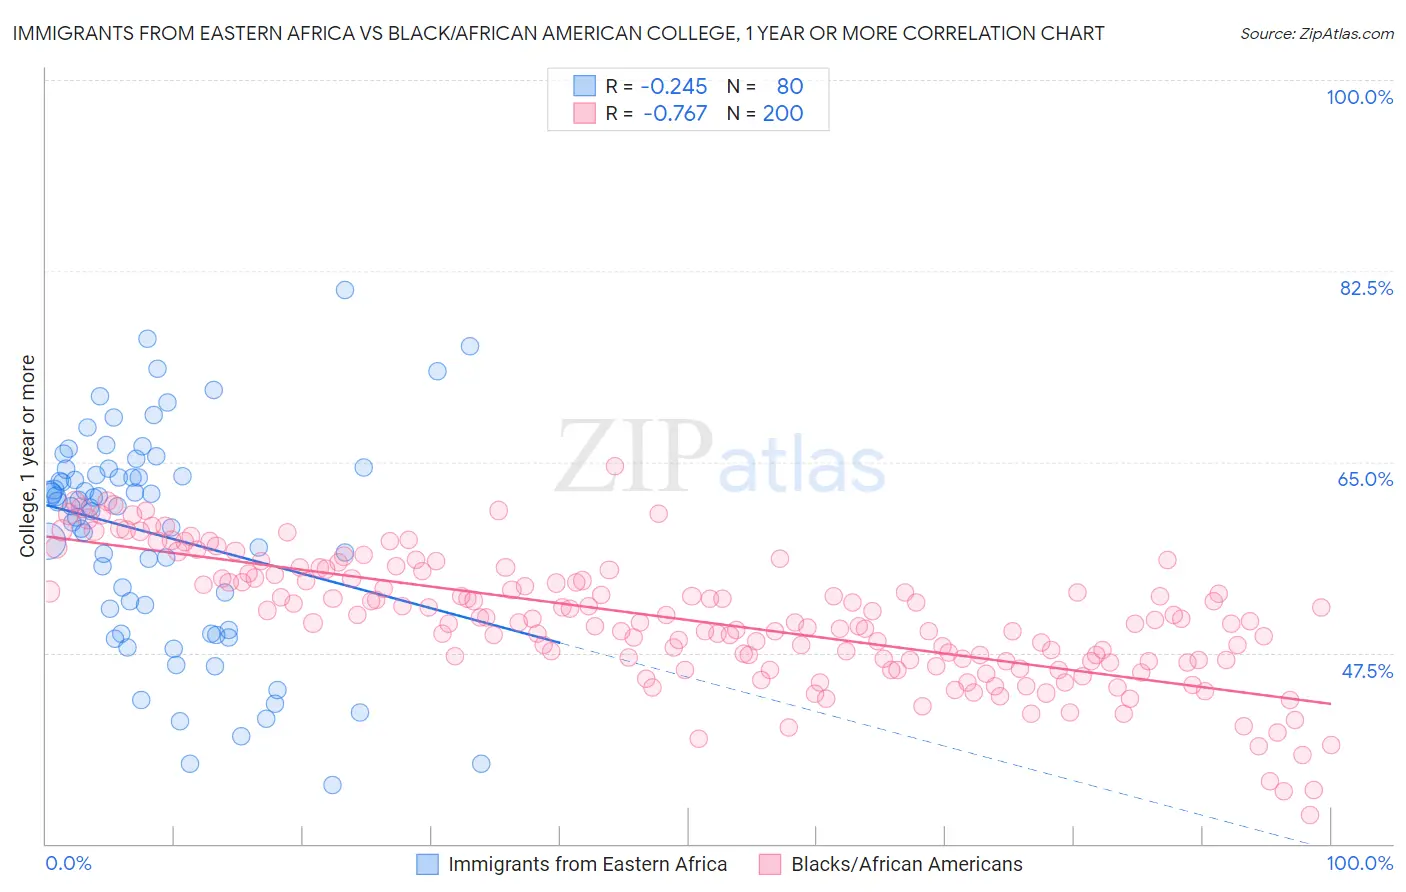 Immigrants from Eastern Africa vs Black/African American College, 1 year or more